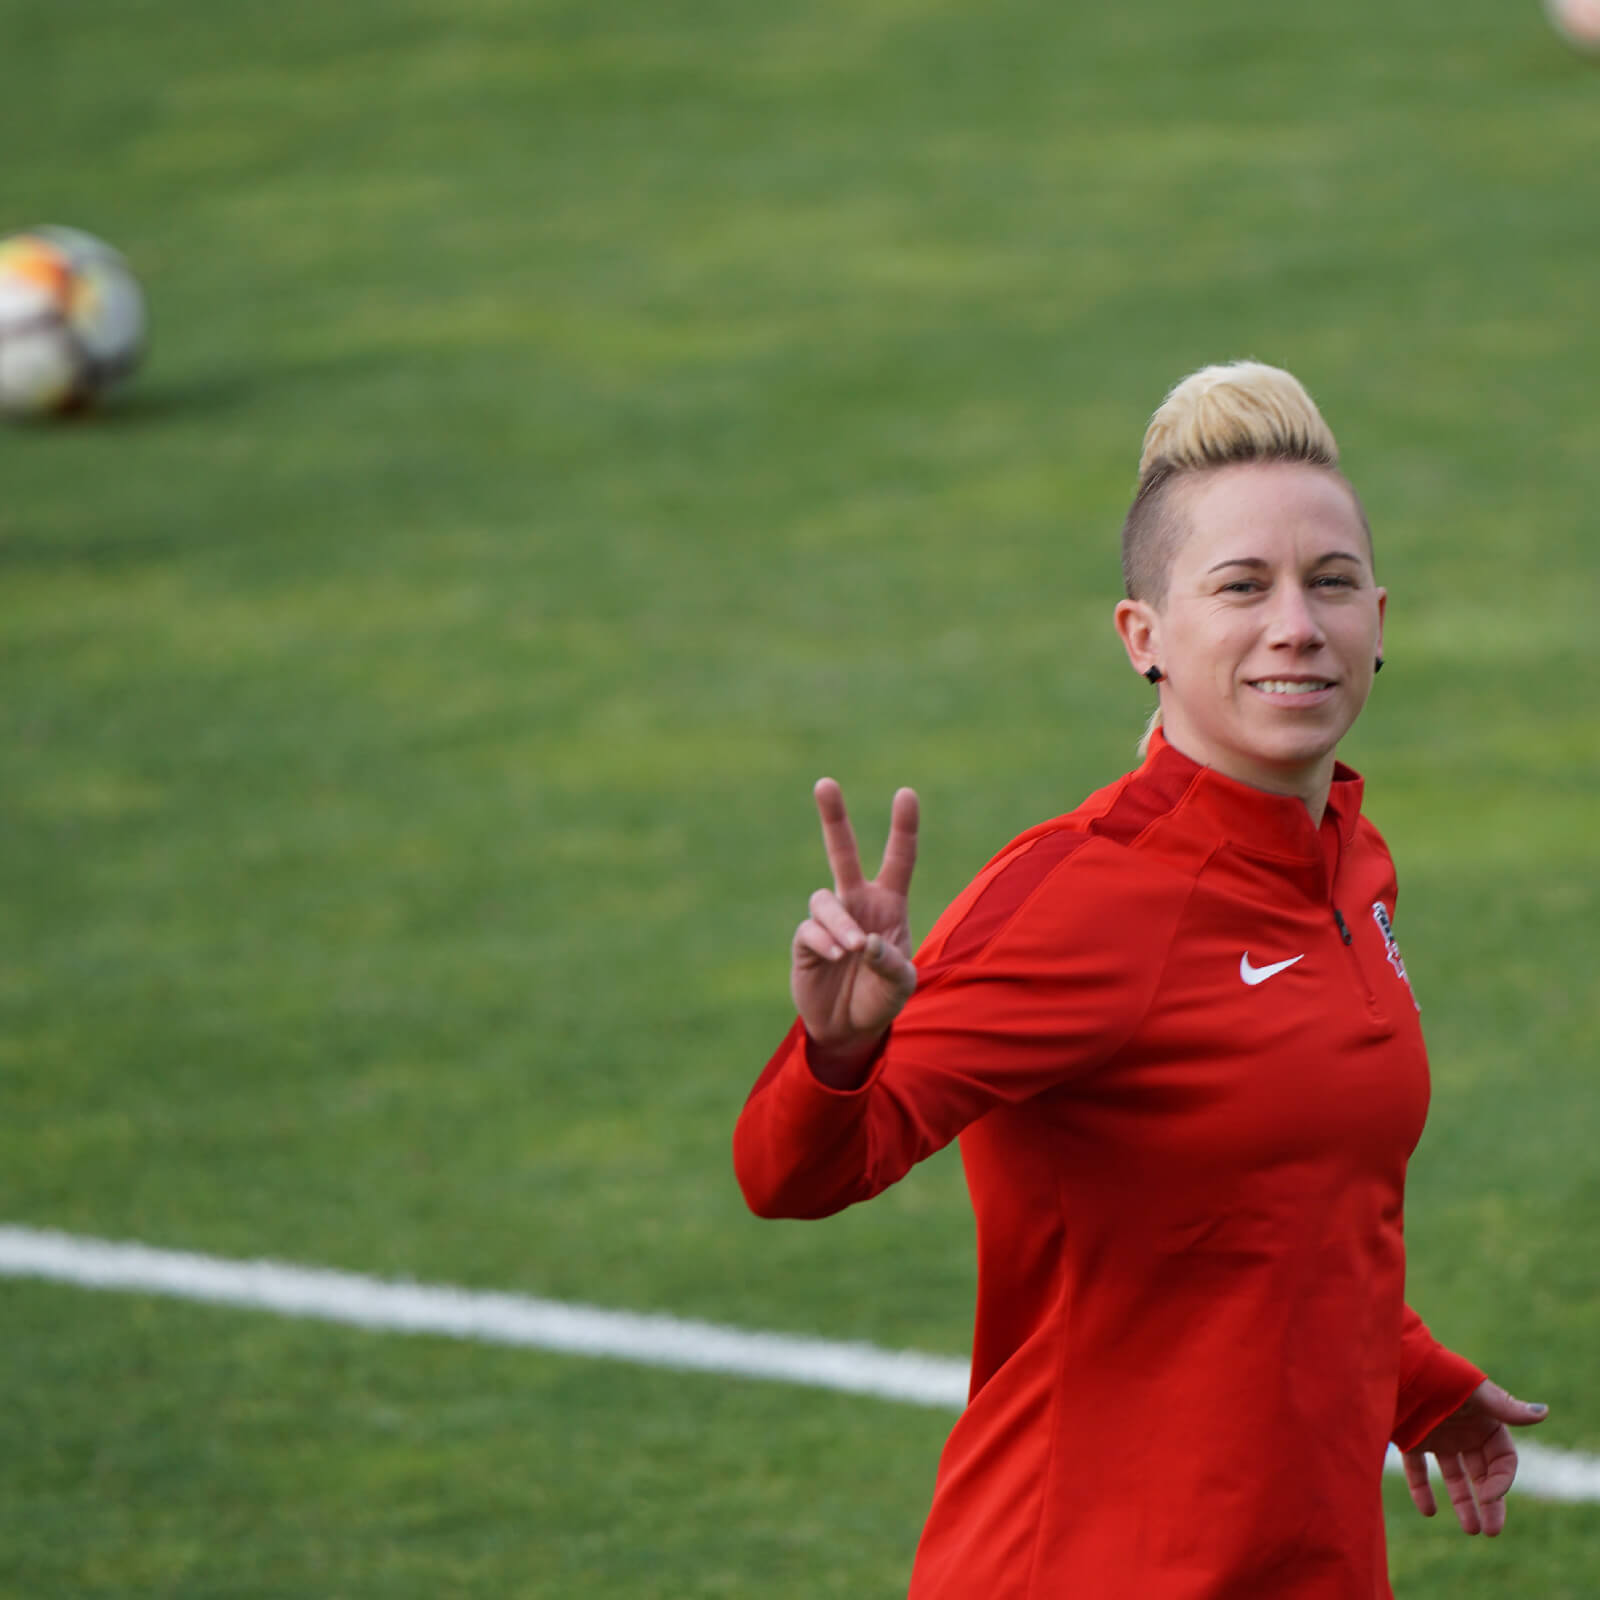 Footballer wearing red and giving a peace sign